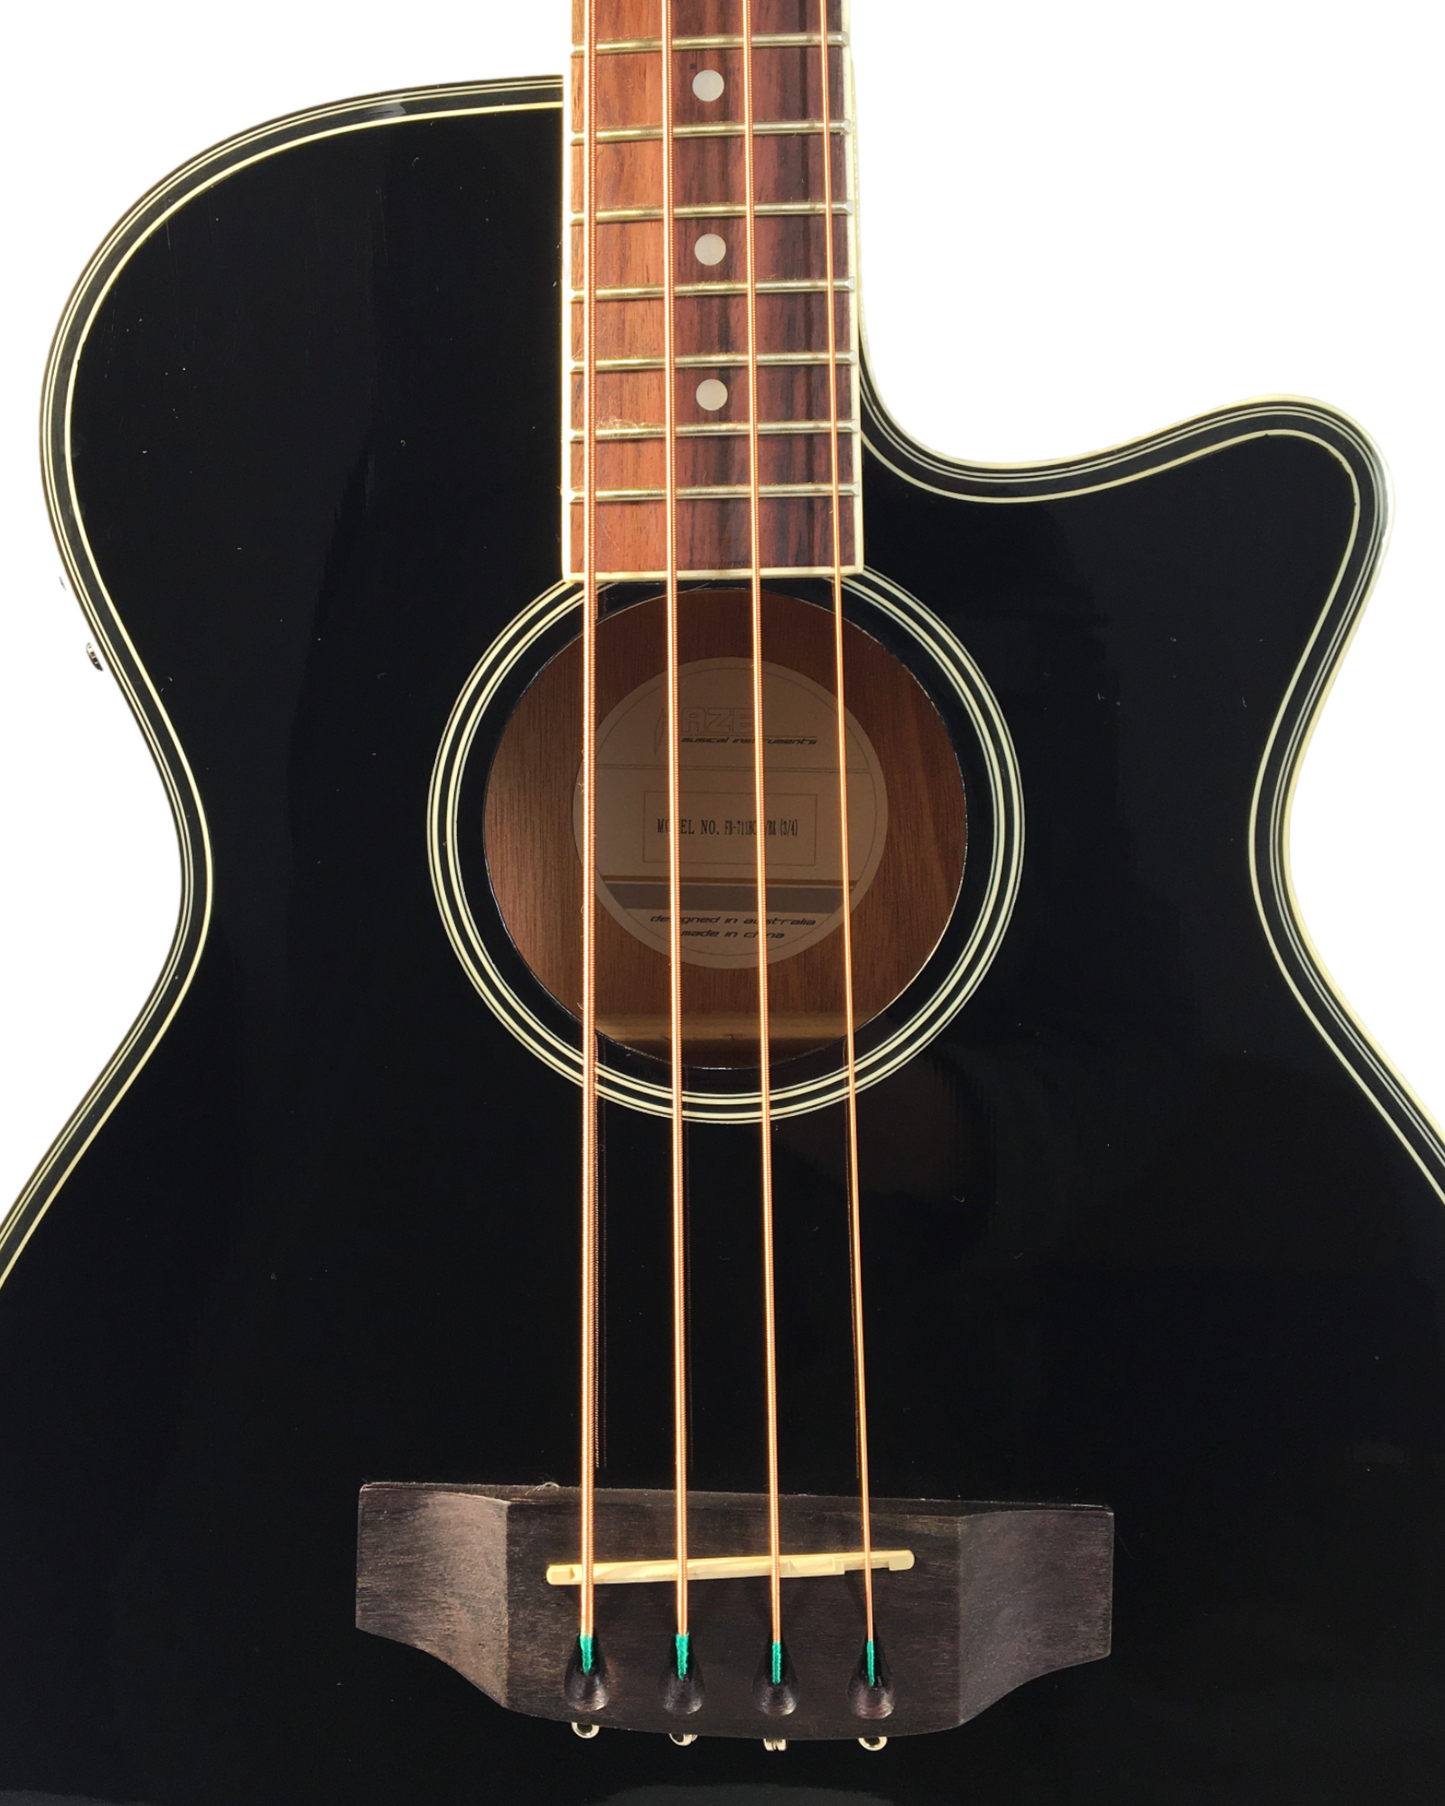 Haze FB711BCEQBK34 4-String Electric-Acoustic Bass Guitar with EQ, comes with bag, picks